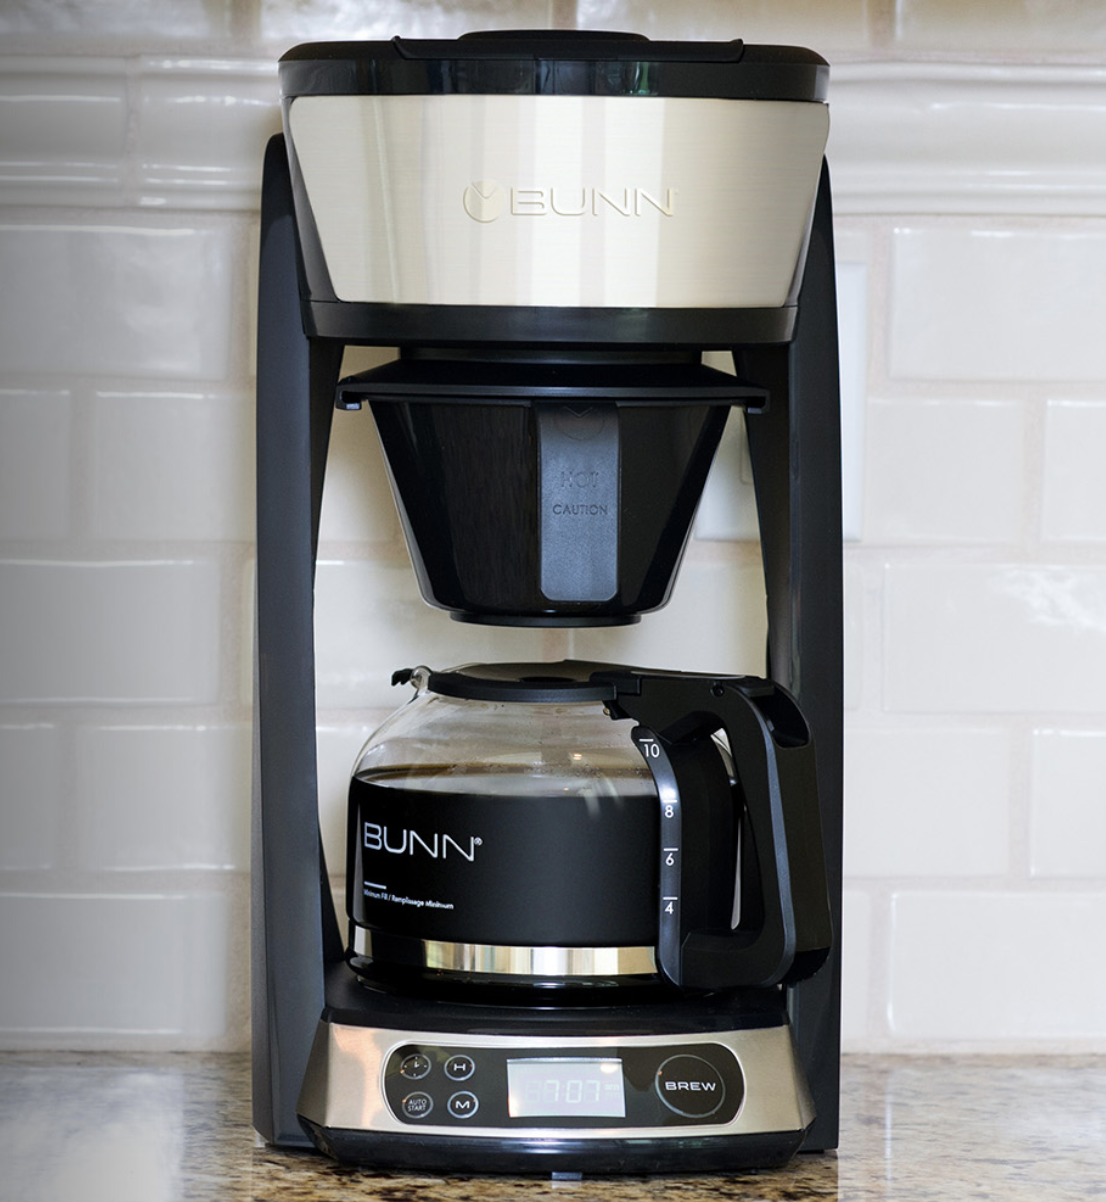 Bunn Programmable Coffee Maker – Heat and Brew Review